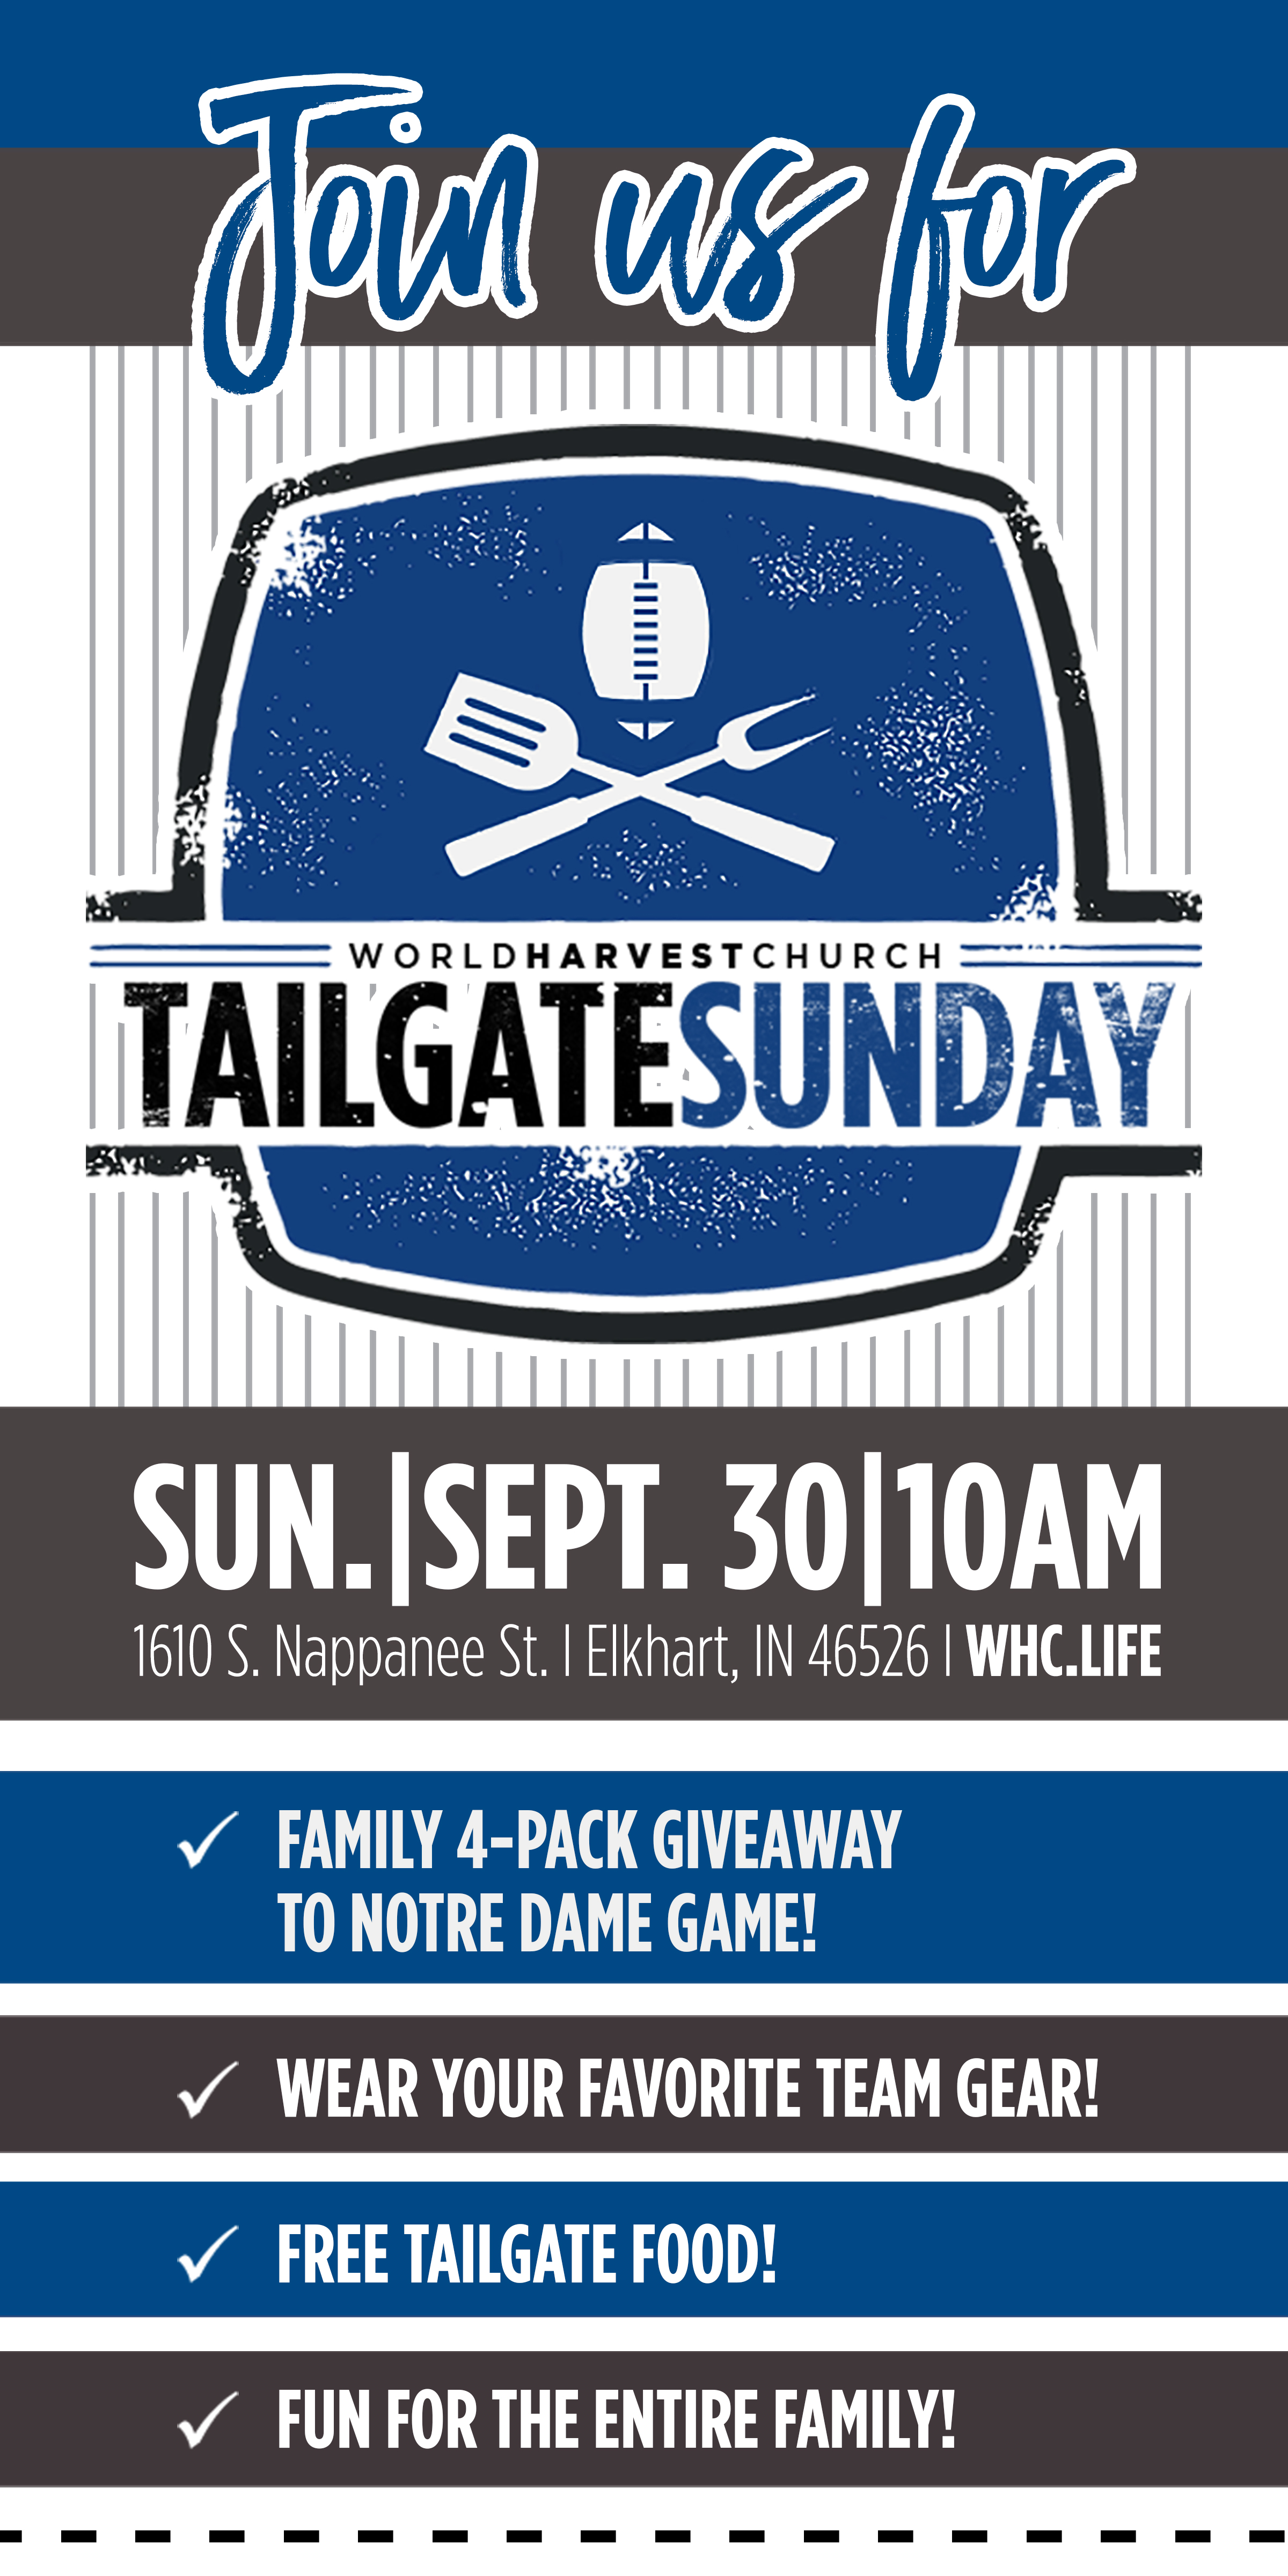 Join us for Tailgate Sunday | Sunday, September 30, at 10am | 1610 S. Nappanee St. Elkhart, Indiana 46526 - whc.life | Family 4-pack giveaway to Notre Dame game! | Wear your favorite team gear! | Free tailgate  food! | Fun for the entire family!